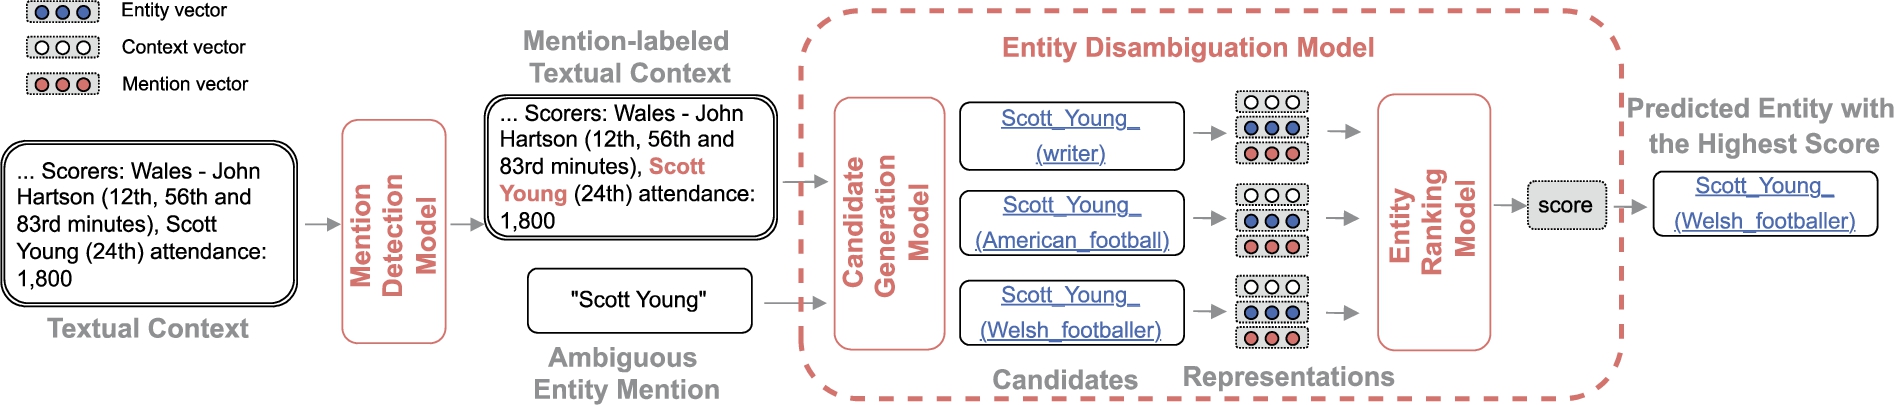 General architecture for neural entity linking. Entity linking (EL) consists of two main steps: mention detection (MD), when entity mention boundaries in a text are identified, and entity disambiguation (ED), when a corresponding entity is predicted for the given mention. Entity disambiguation is further carried out in two steps: candidate generation, when possible candidate entities are selected for the mention, and entity ranking, when a correspondence score between context/mention and each candidate is computed through the comparison of their vector representations.